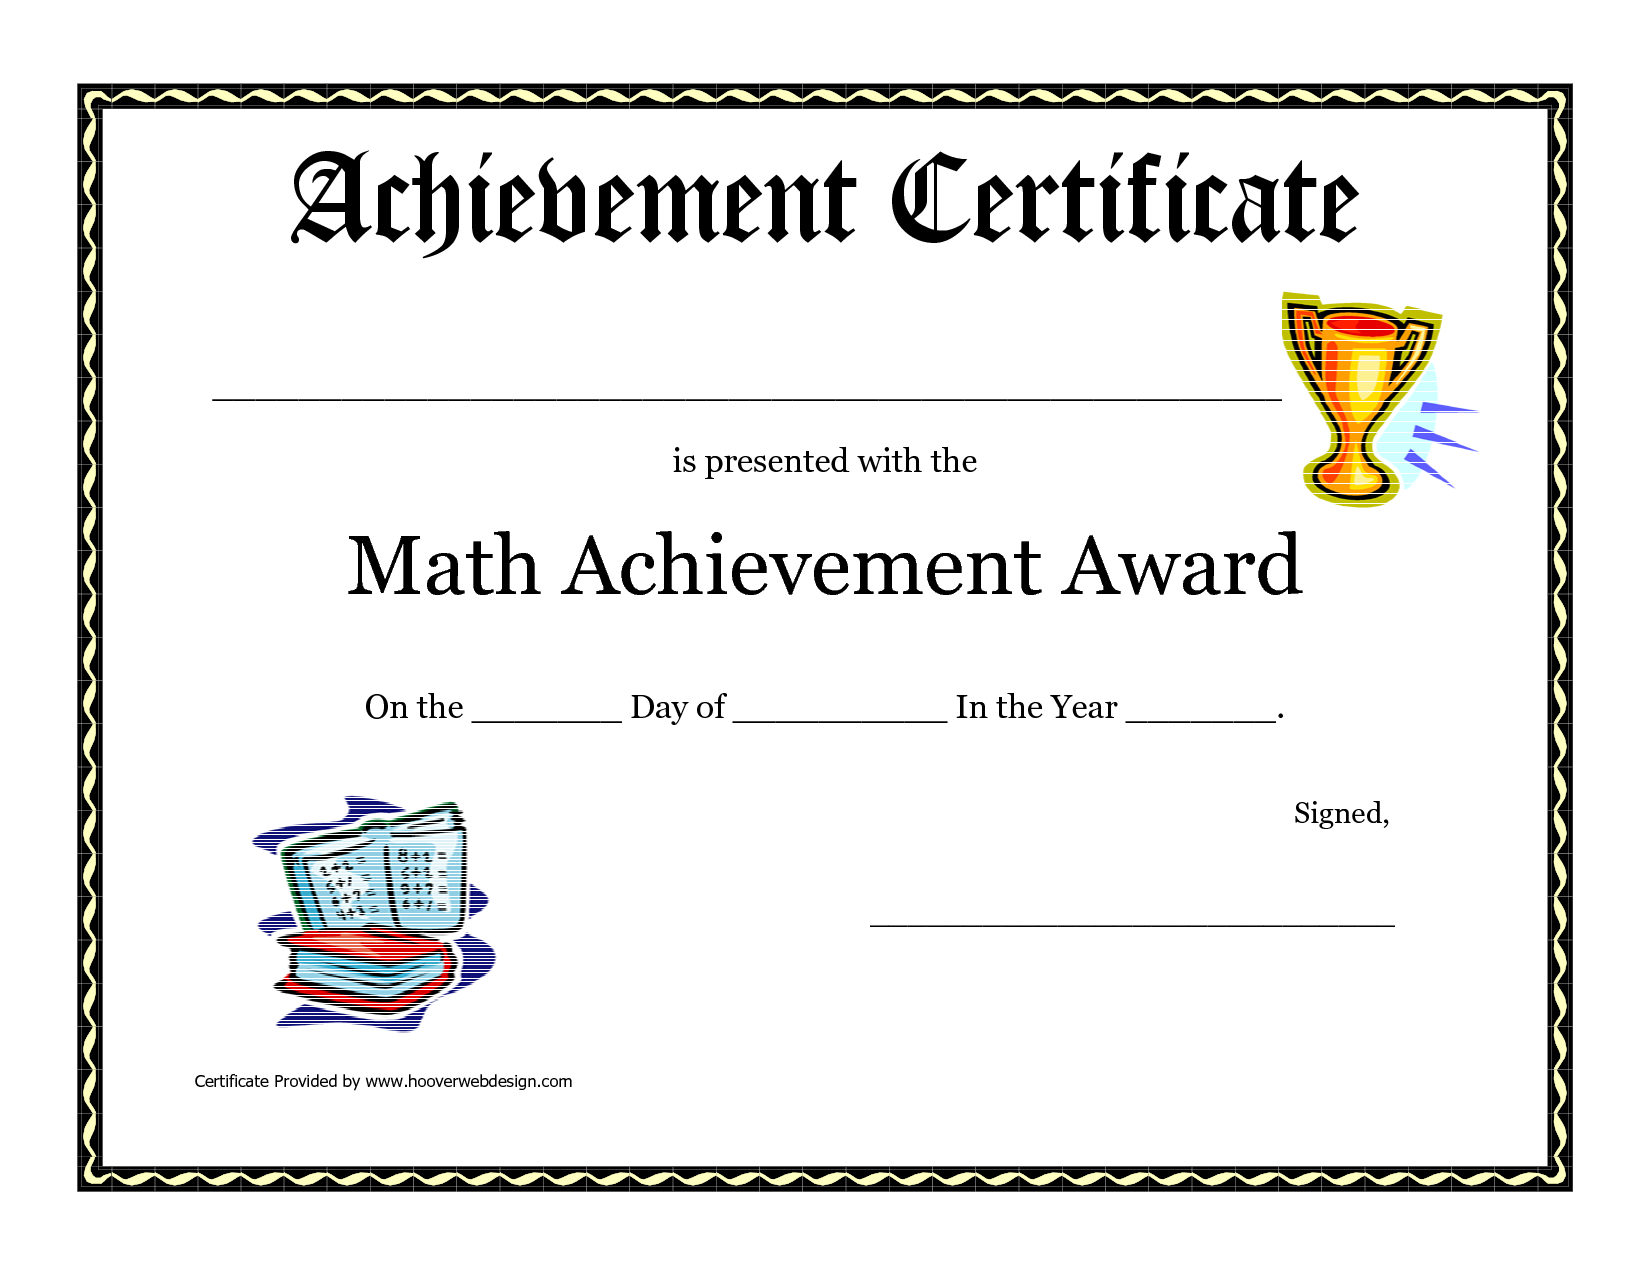 Math Achievement Award Printable Certificate Pdf | Math Activites - Free Printable Award Certificates For Elementary Students